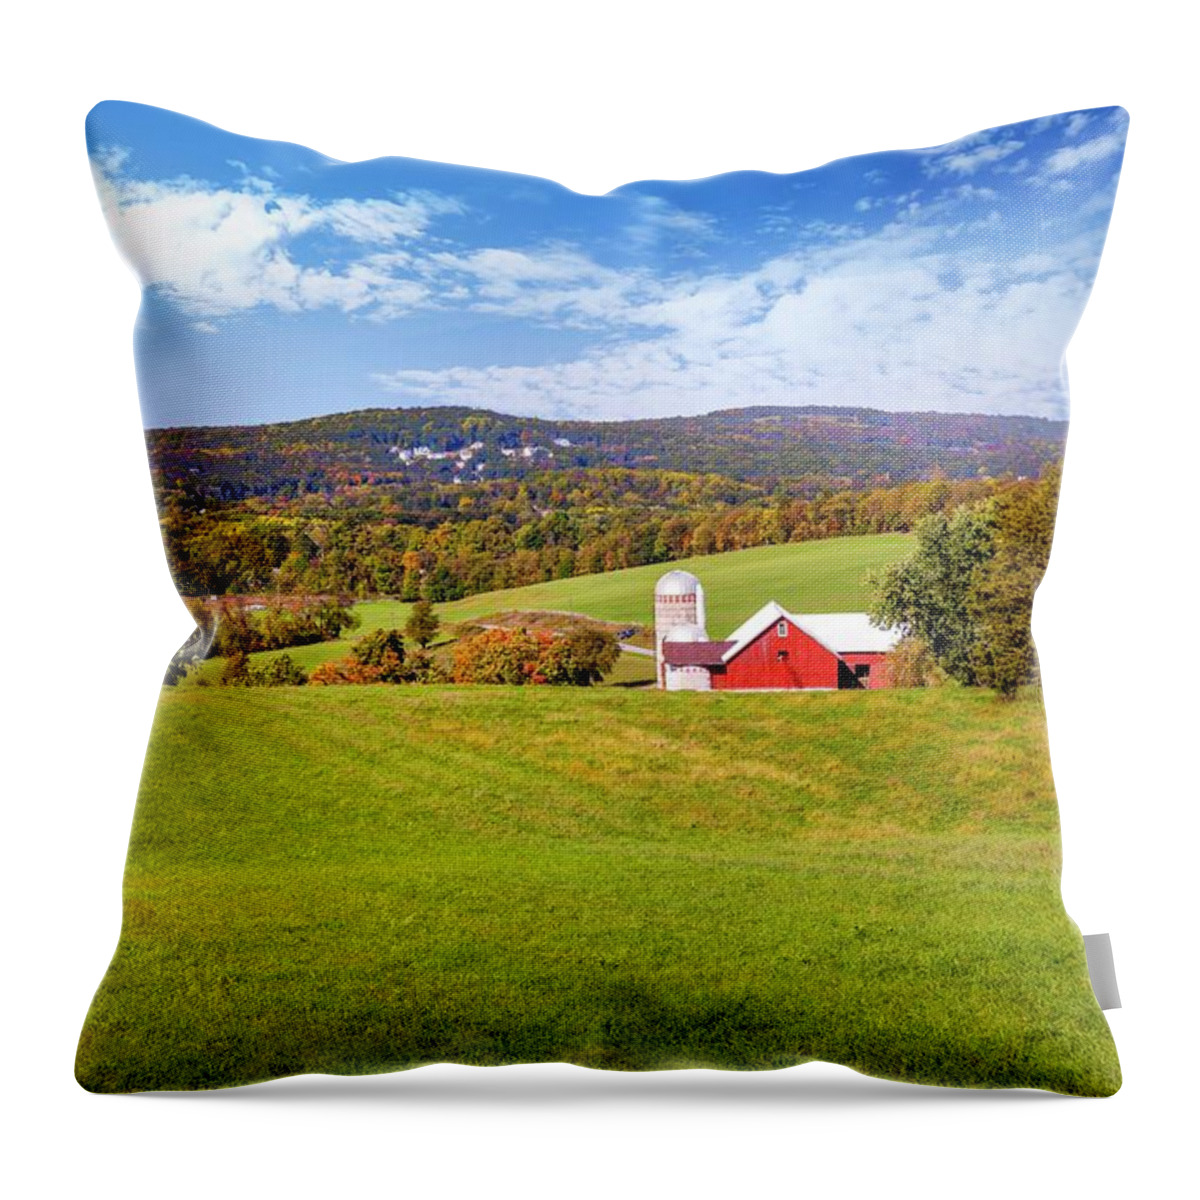 Estock Throw Pillow featuring the digital art Farm With Barn & Silos, Warwick, Ny by Lumiere